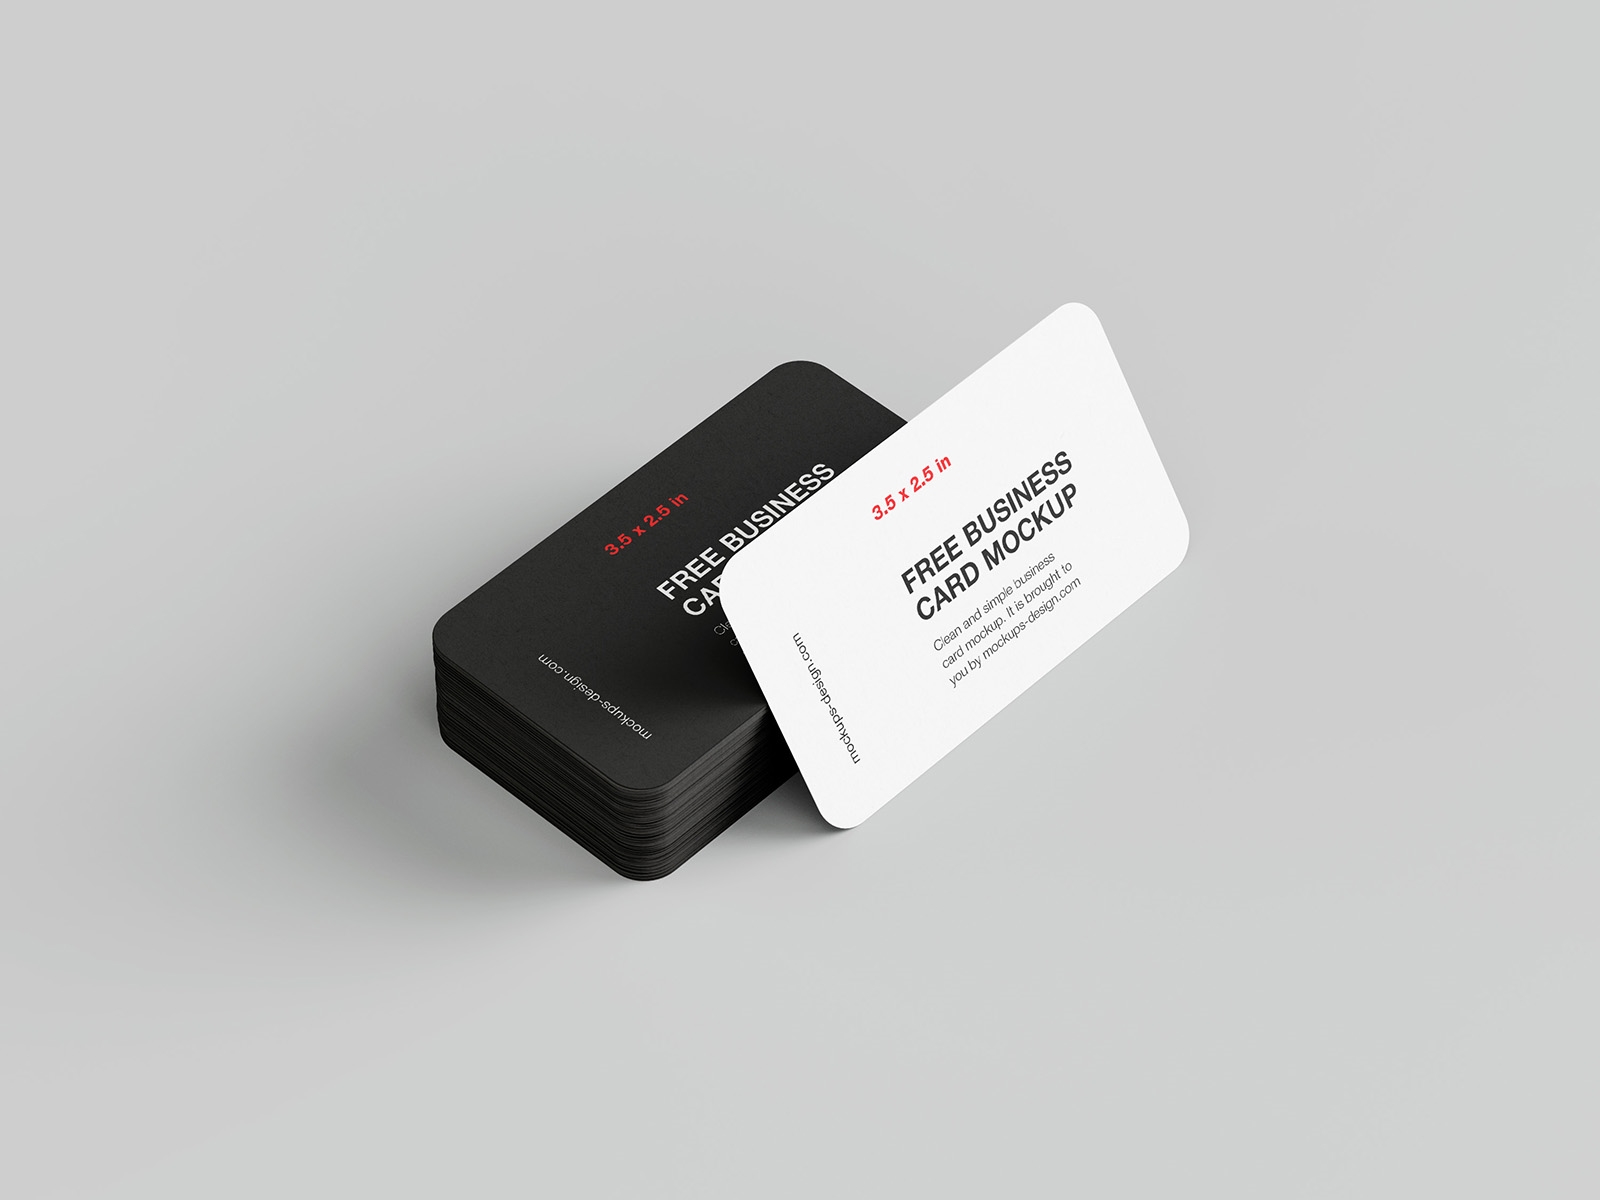 6 Rounded Business Cards Mockups in Top and Perspective Sight FREE PSD